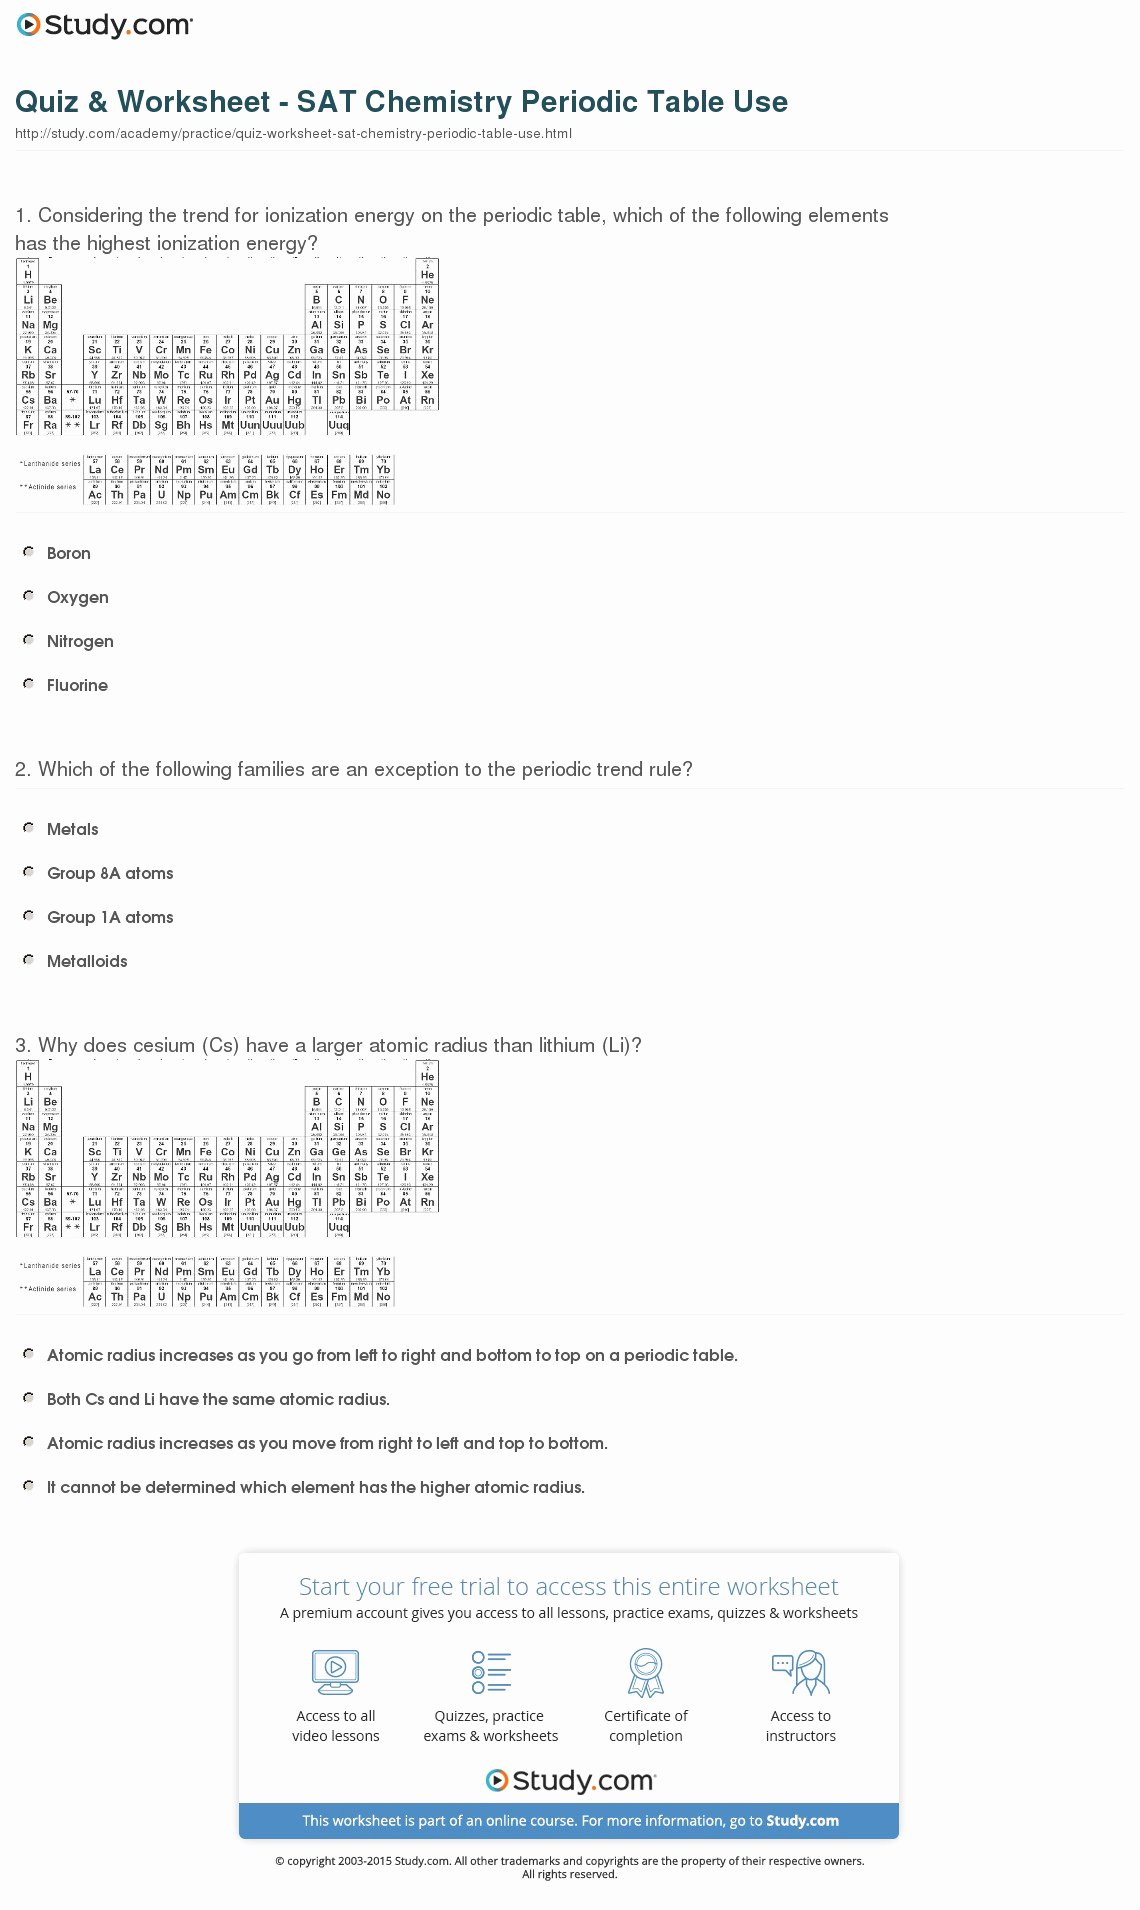 Chemistry Periodic Table Worksheet Beautiful Chemical Elements and Periodic Table Symbols Quiz